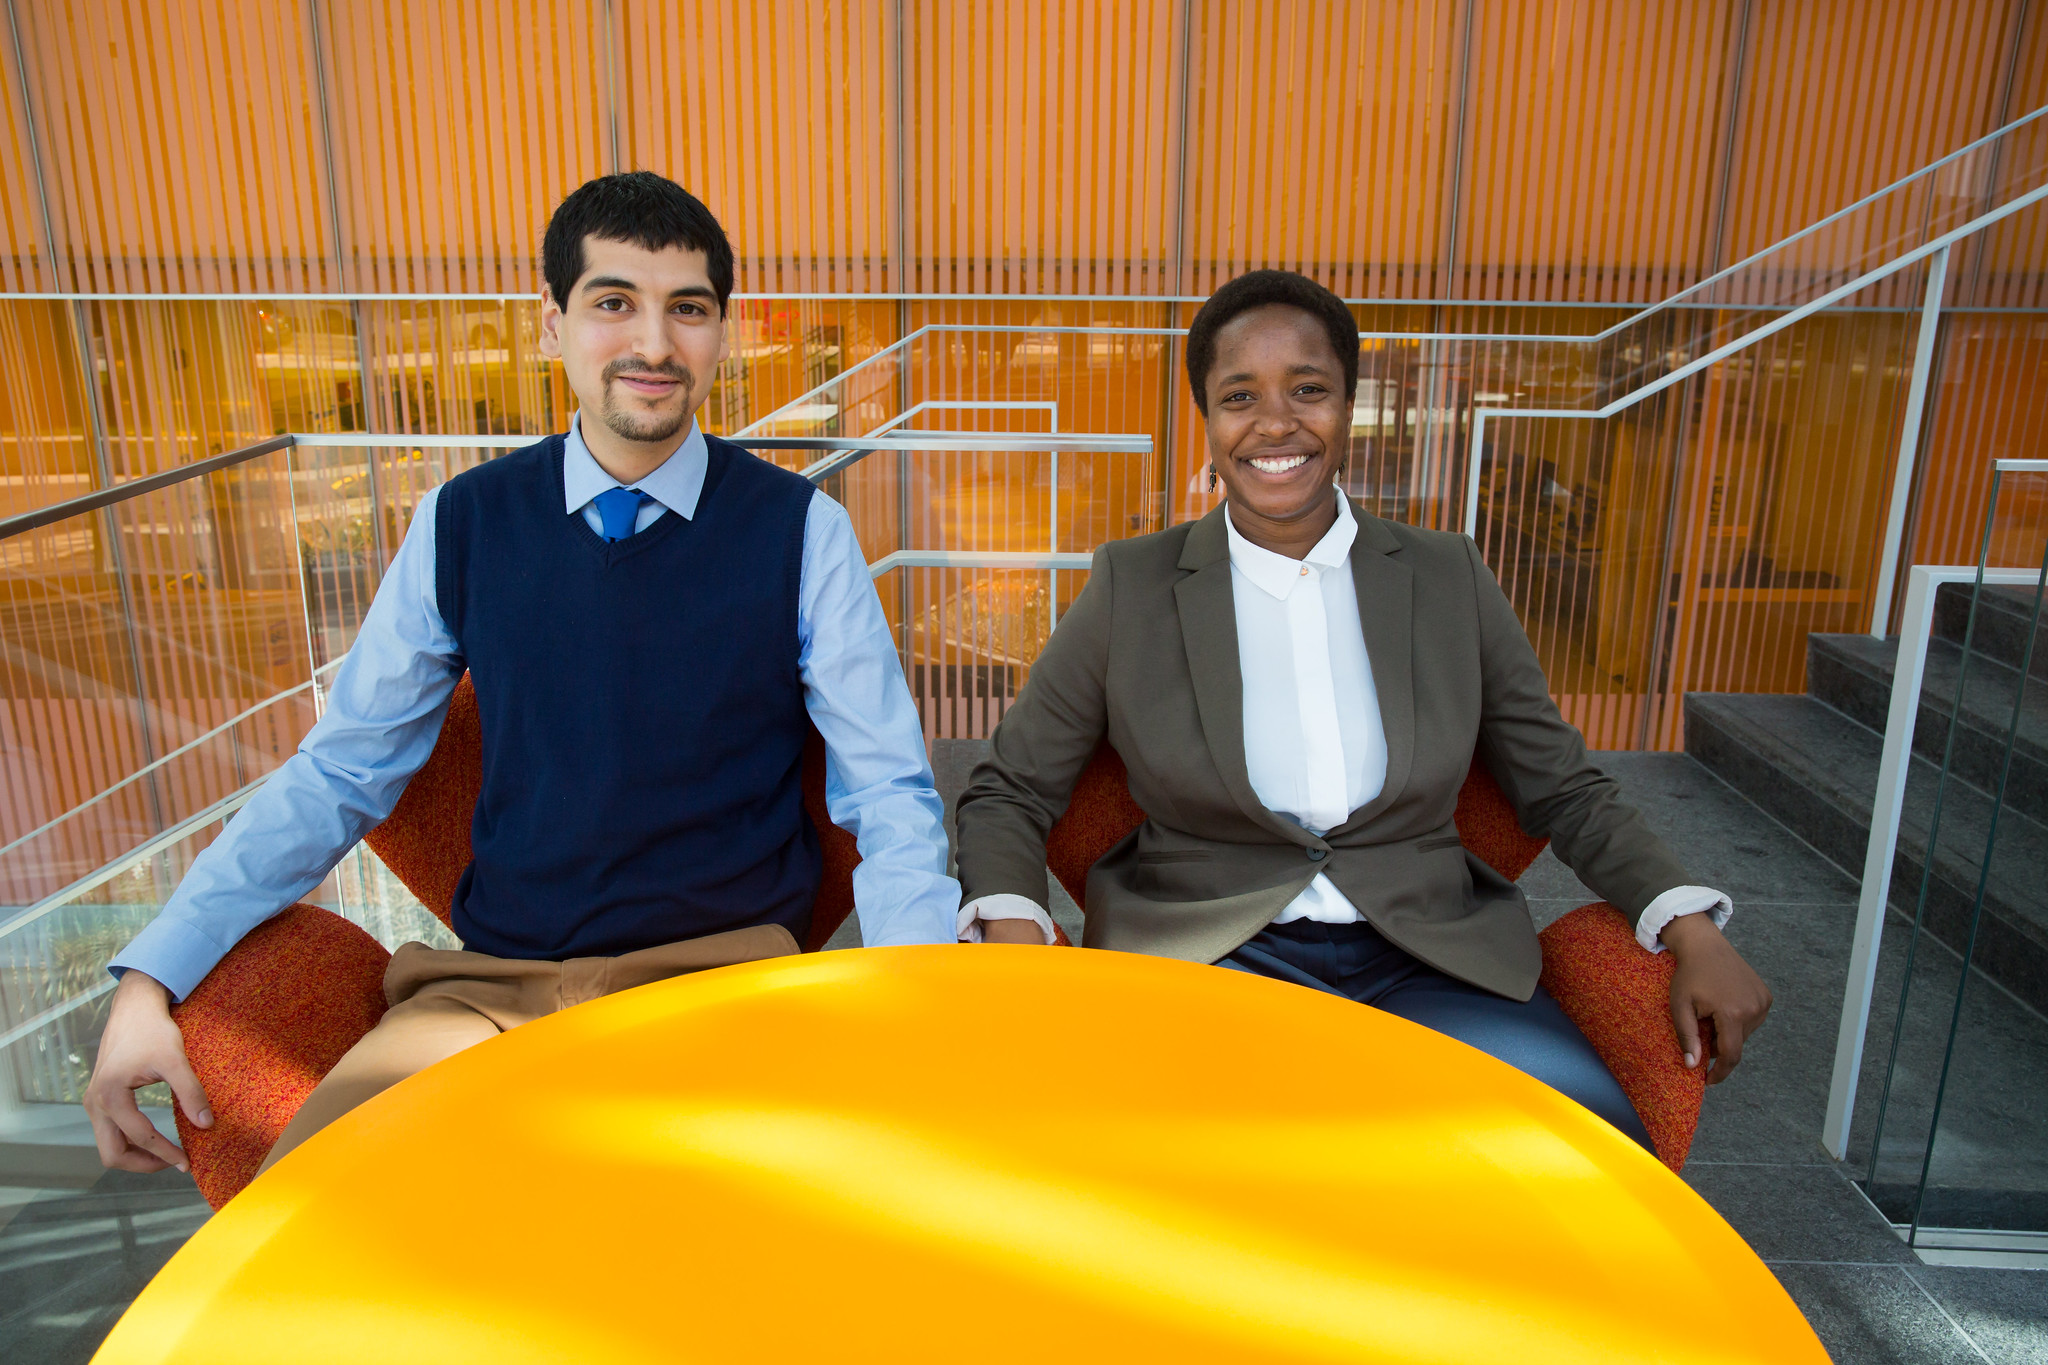 Man and woman sitting behind a yellow table